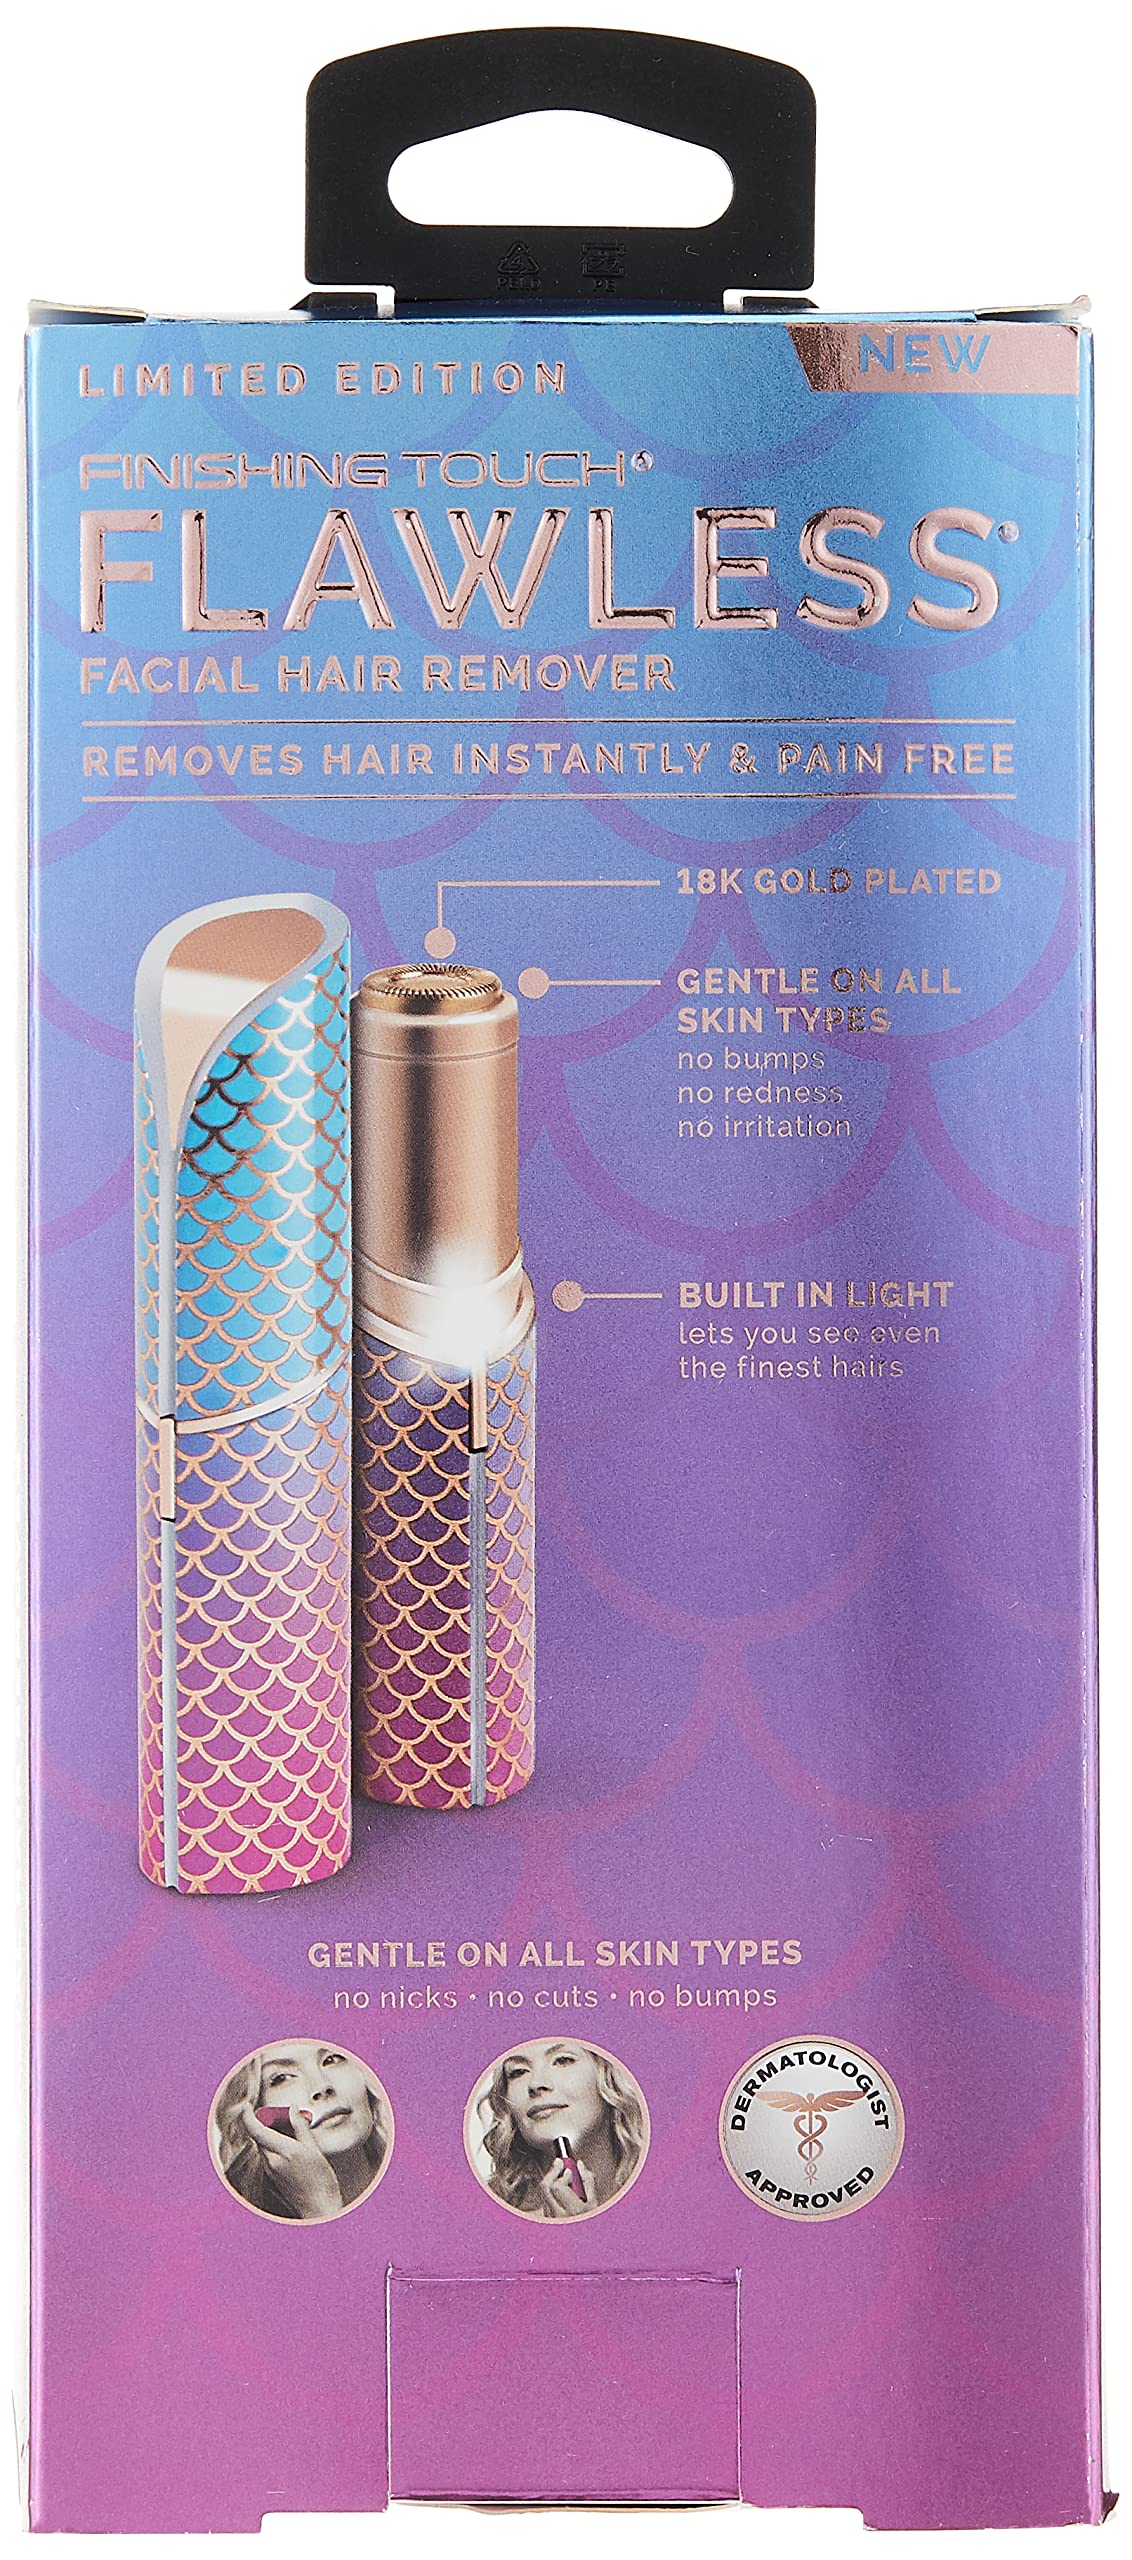 FINISHING TOUCH Flawless Women's Painless Hair Remover, Mermaid/Rose Gold